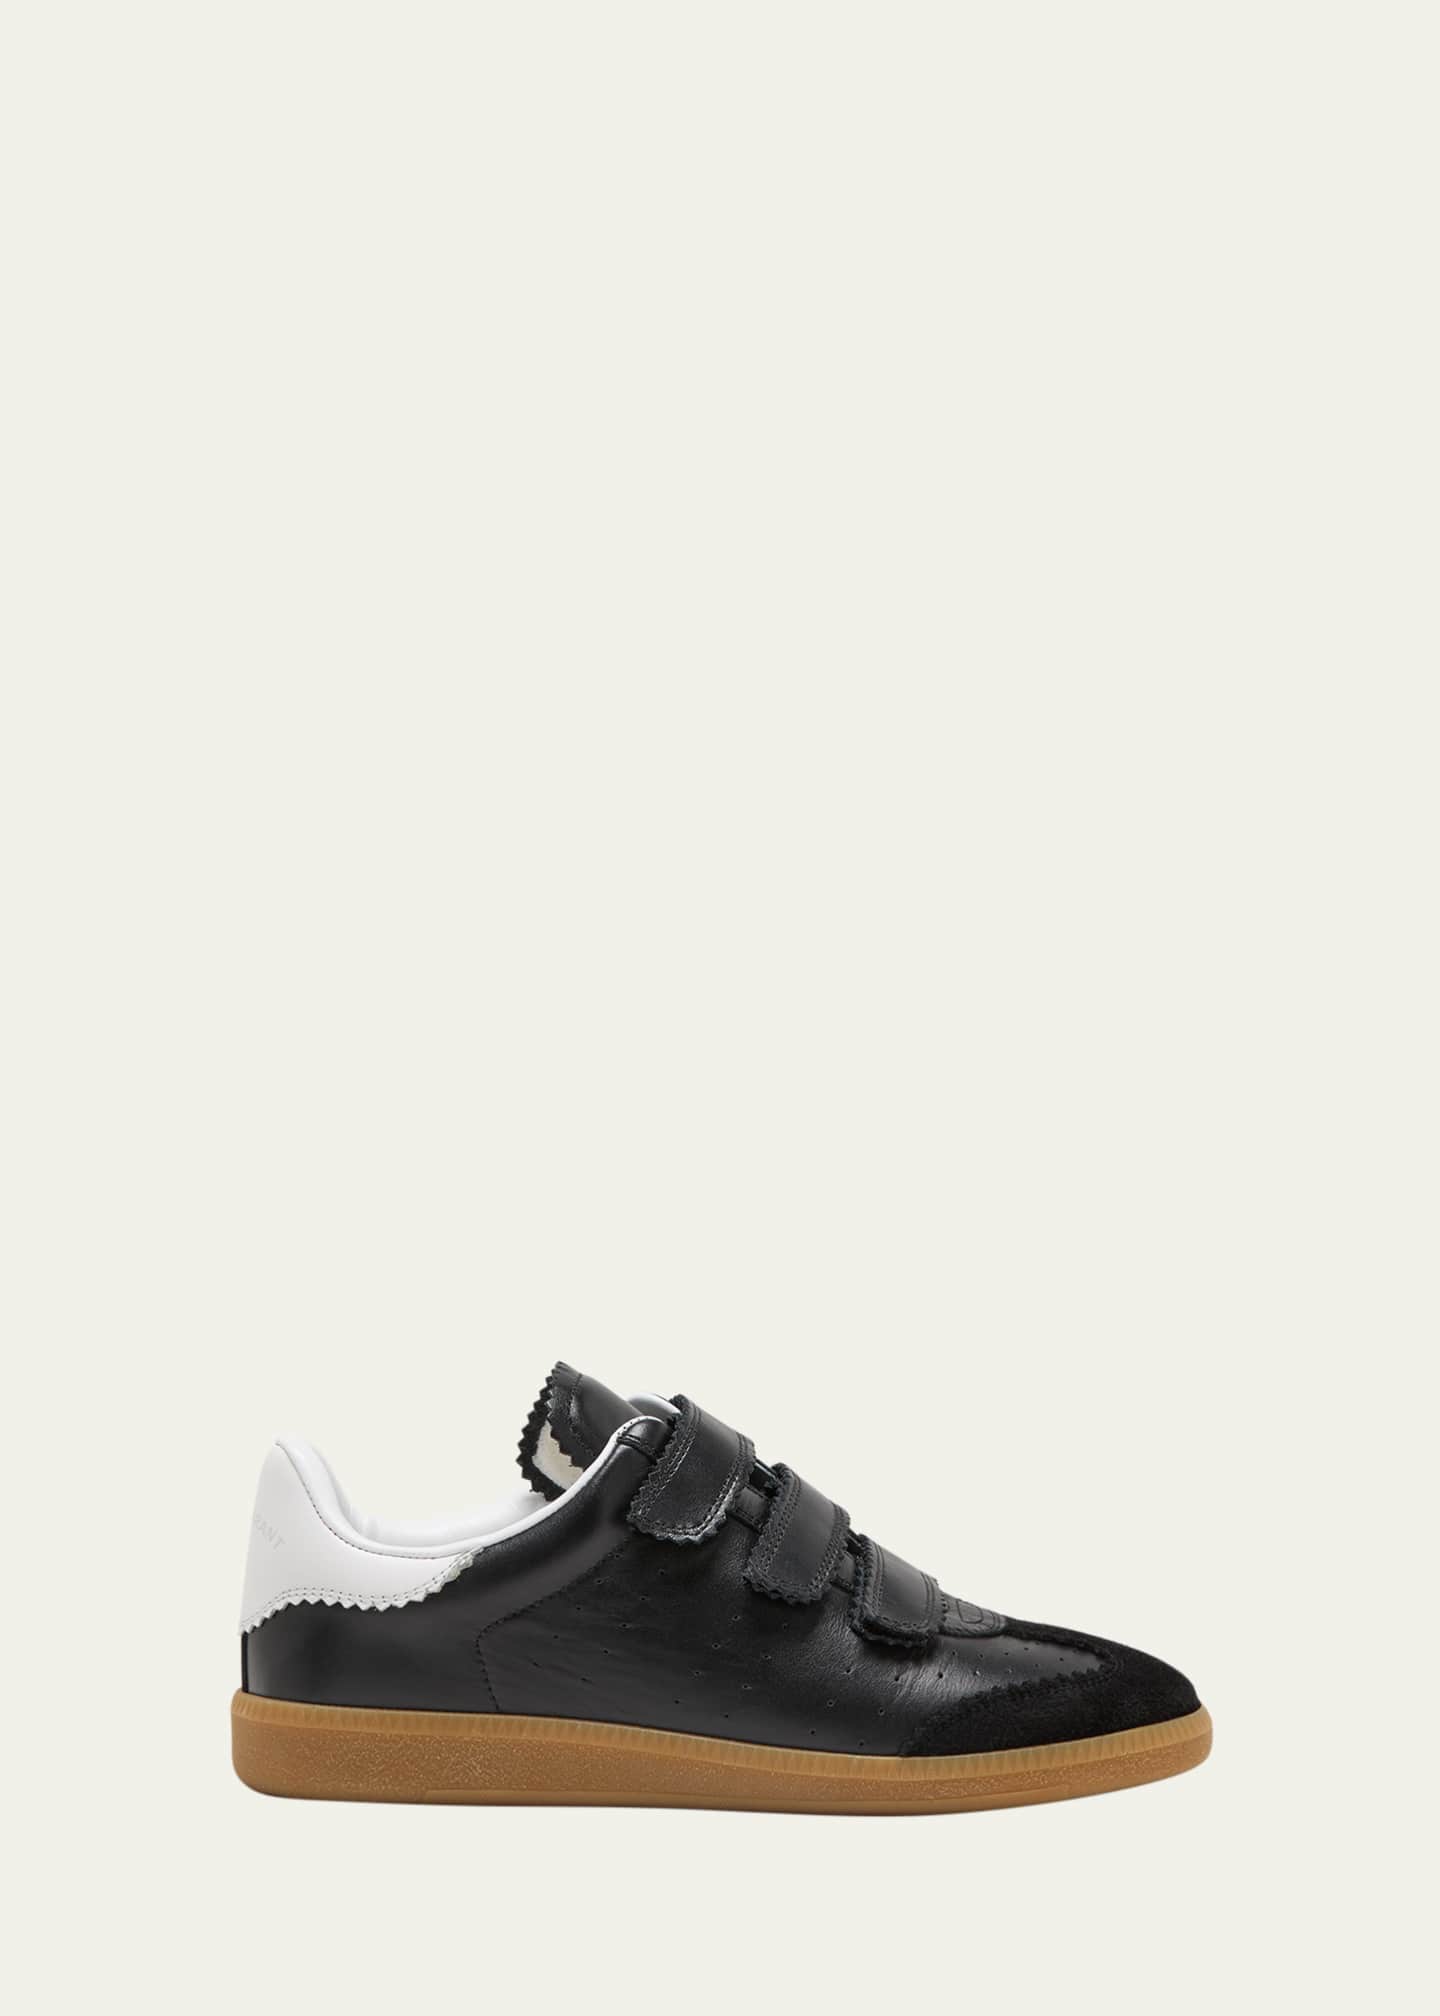 Isabel Marant Beth Perforated Leather Grip-Strap Sneakers Bergdorf Goodman